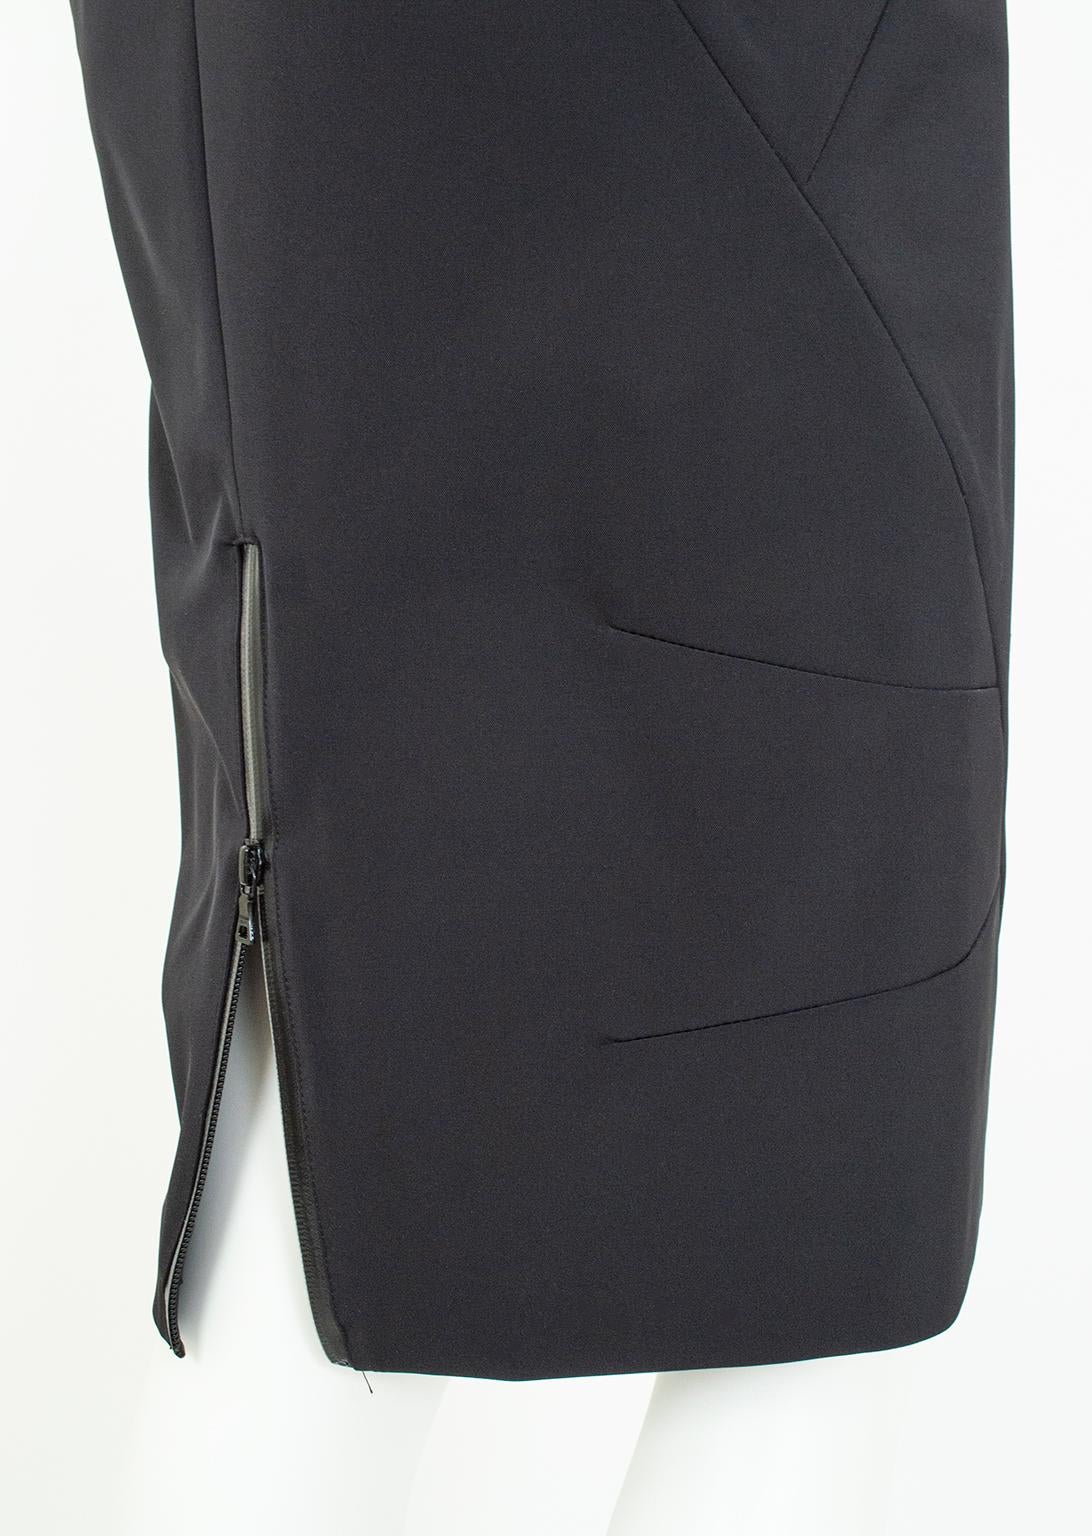 New Prada Black Corset-Seam Pencil Skirt with Vinyl Zippers and Vent – S, 2001 For Sale 2